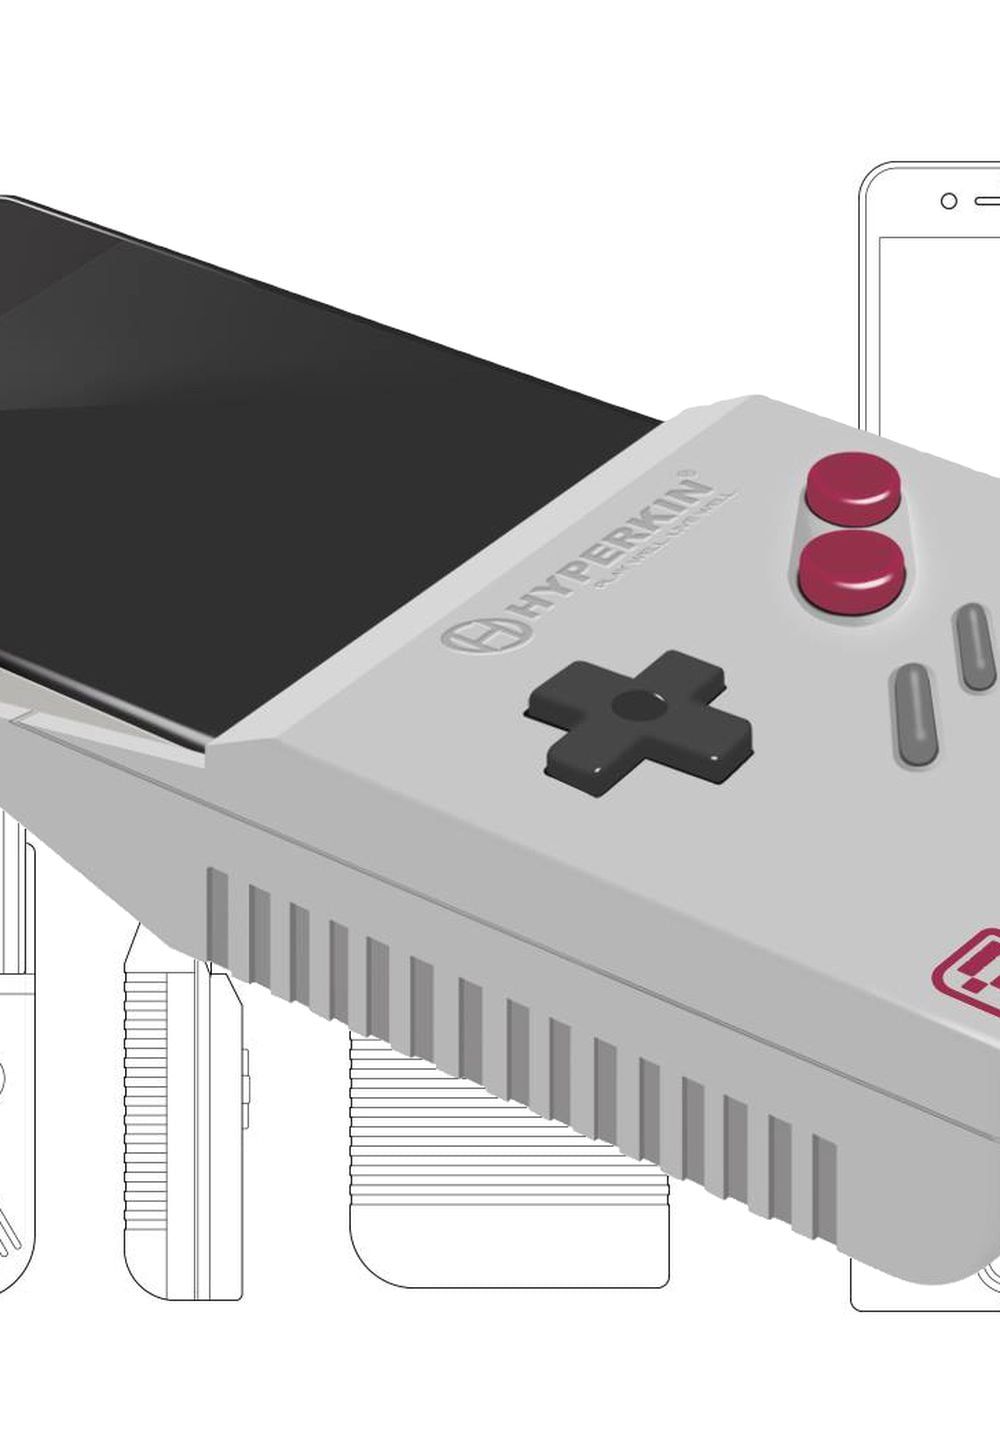 Turn your iPhone 6 Plus into a Game Boy with Hyperkin SmartBoy